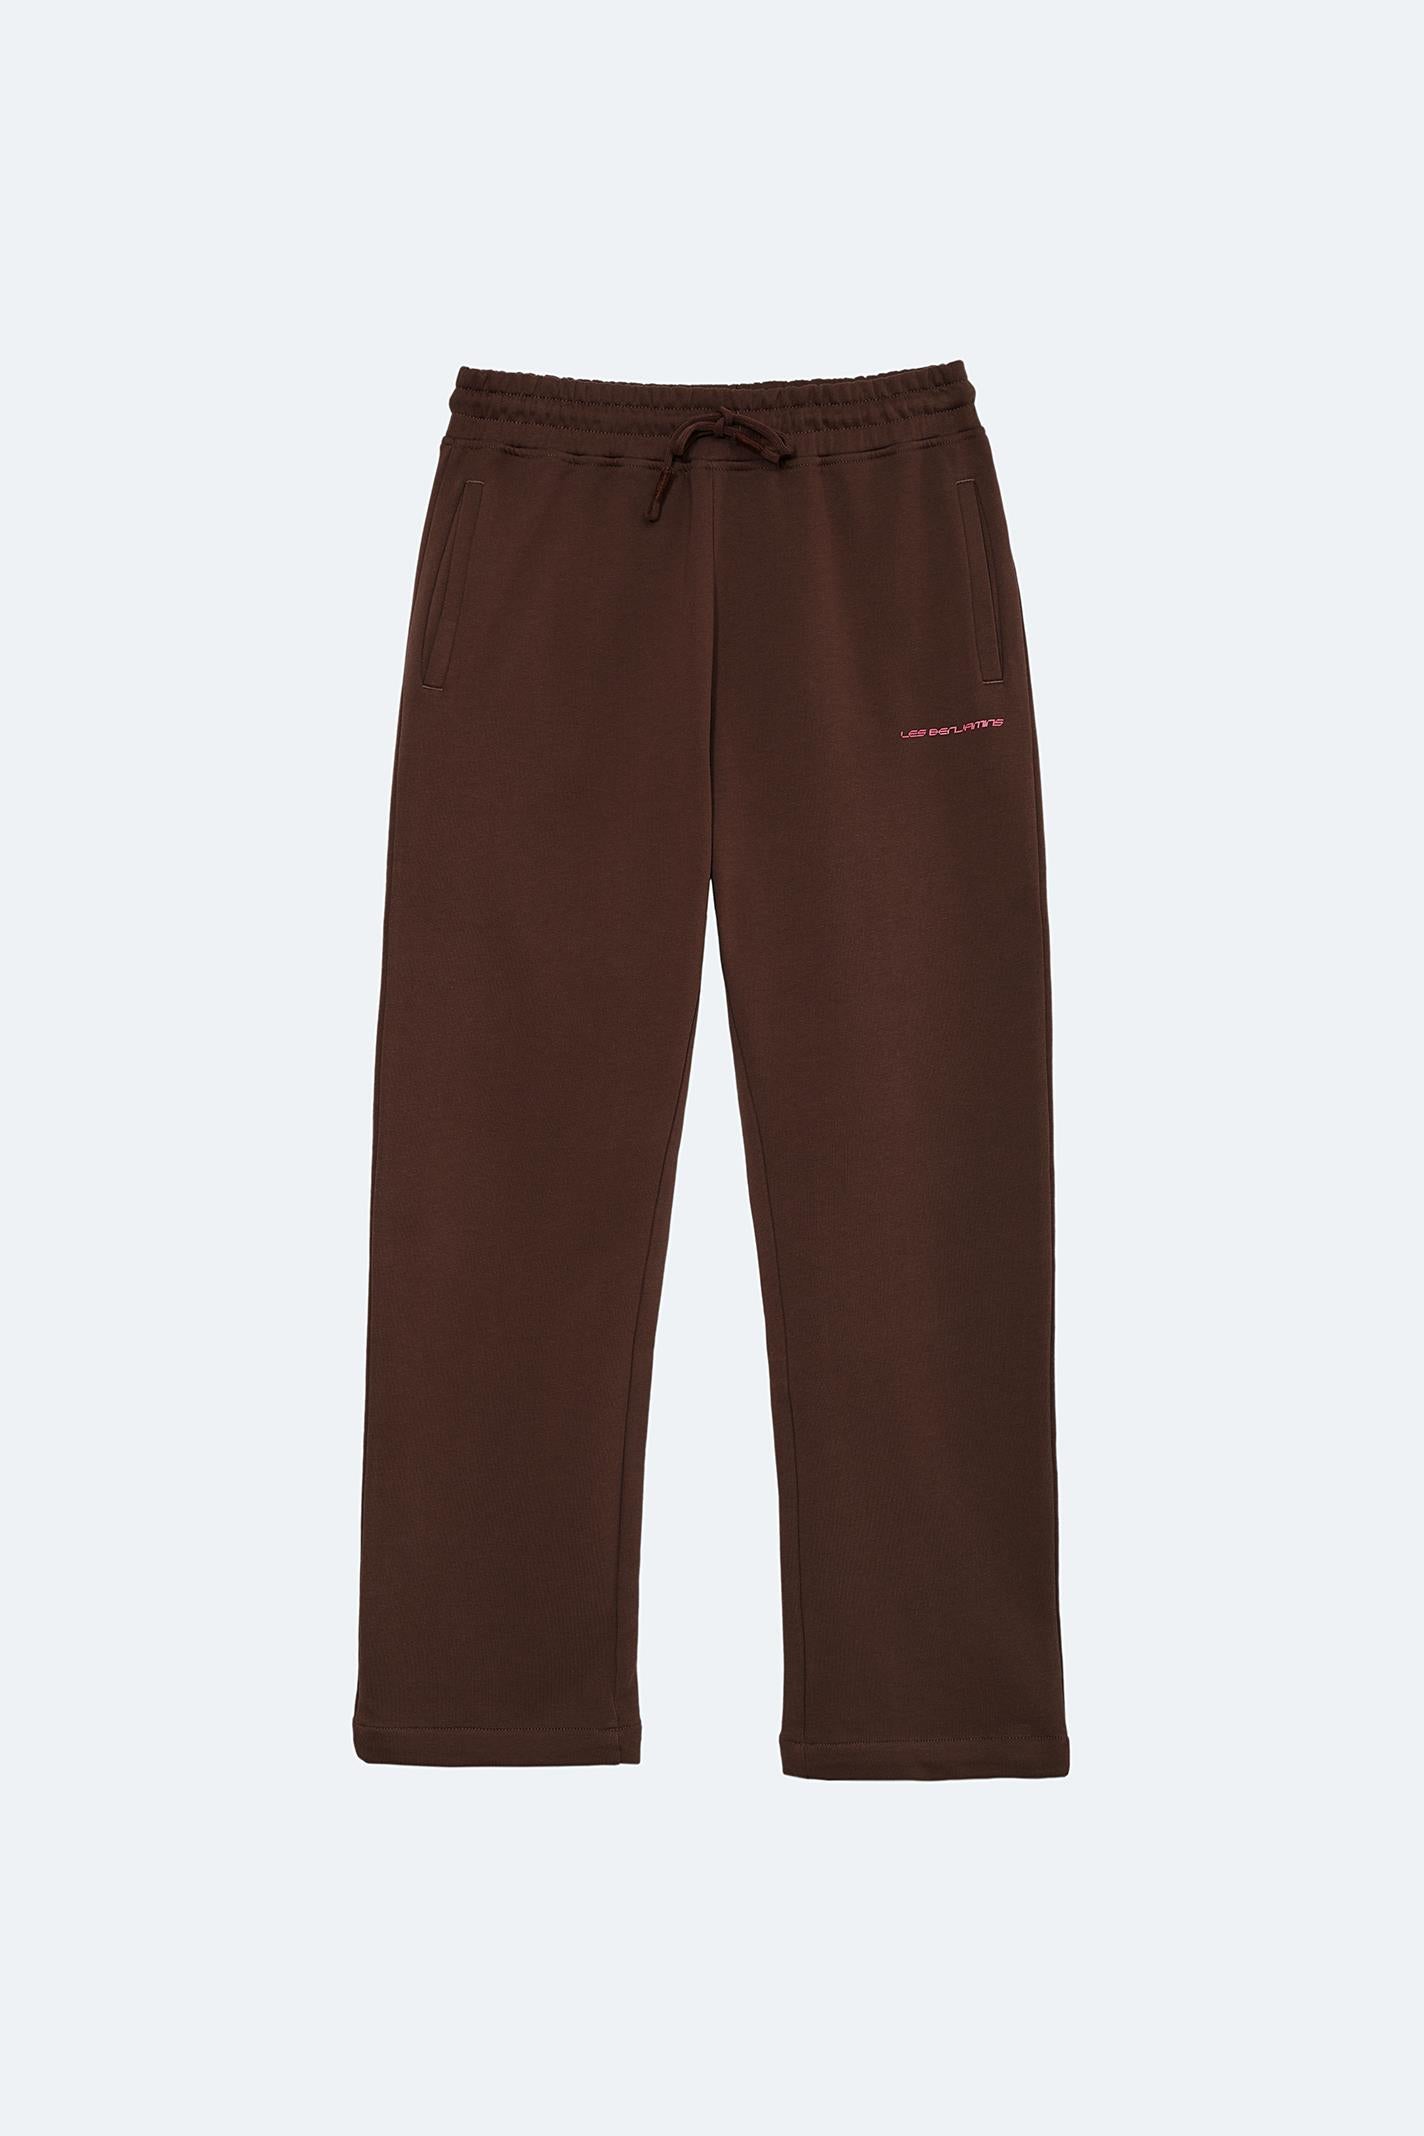 RELAXED SWEATPANT 002 